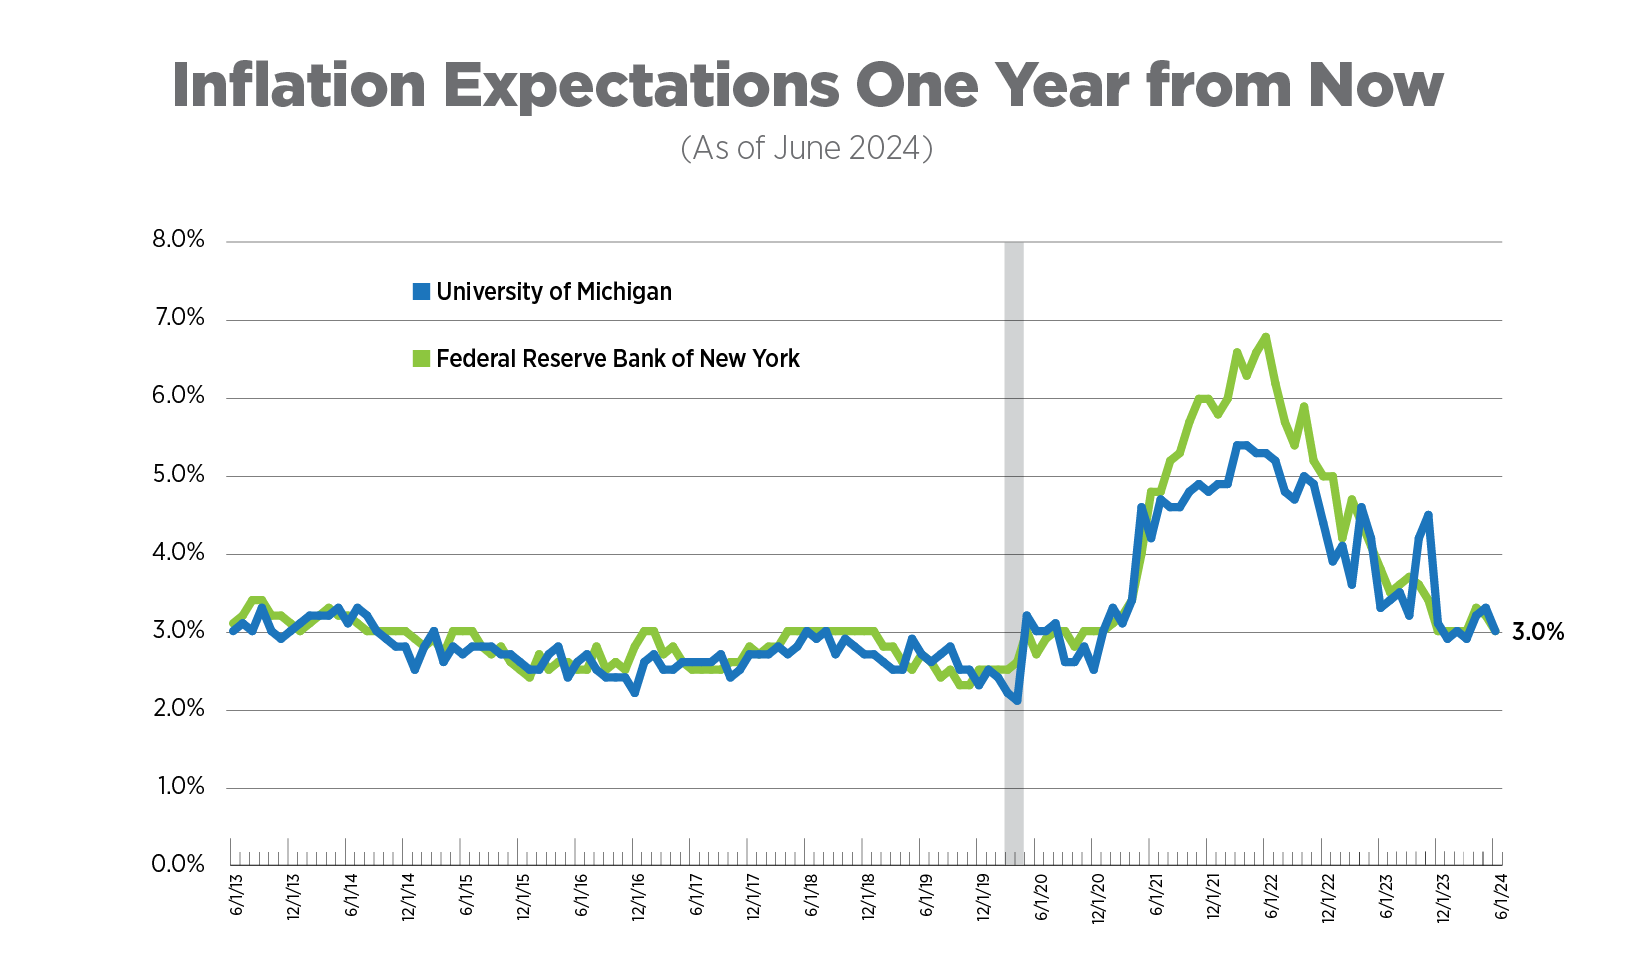 inflation expectations one year from now (as of june 2024)